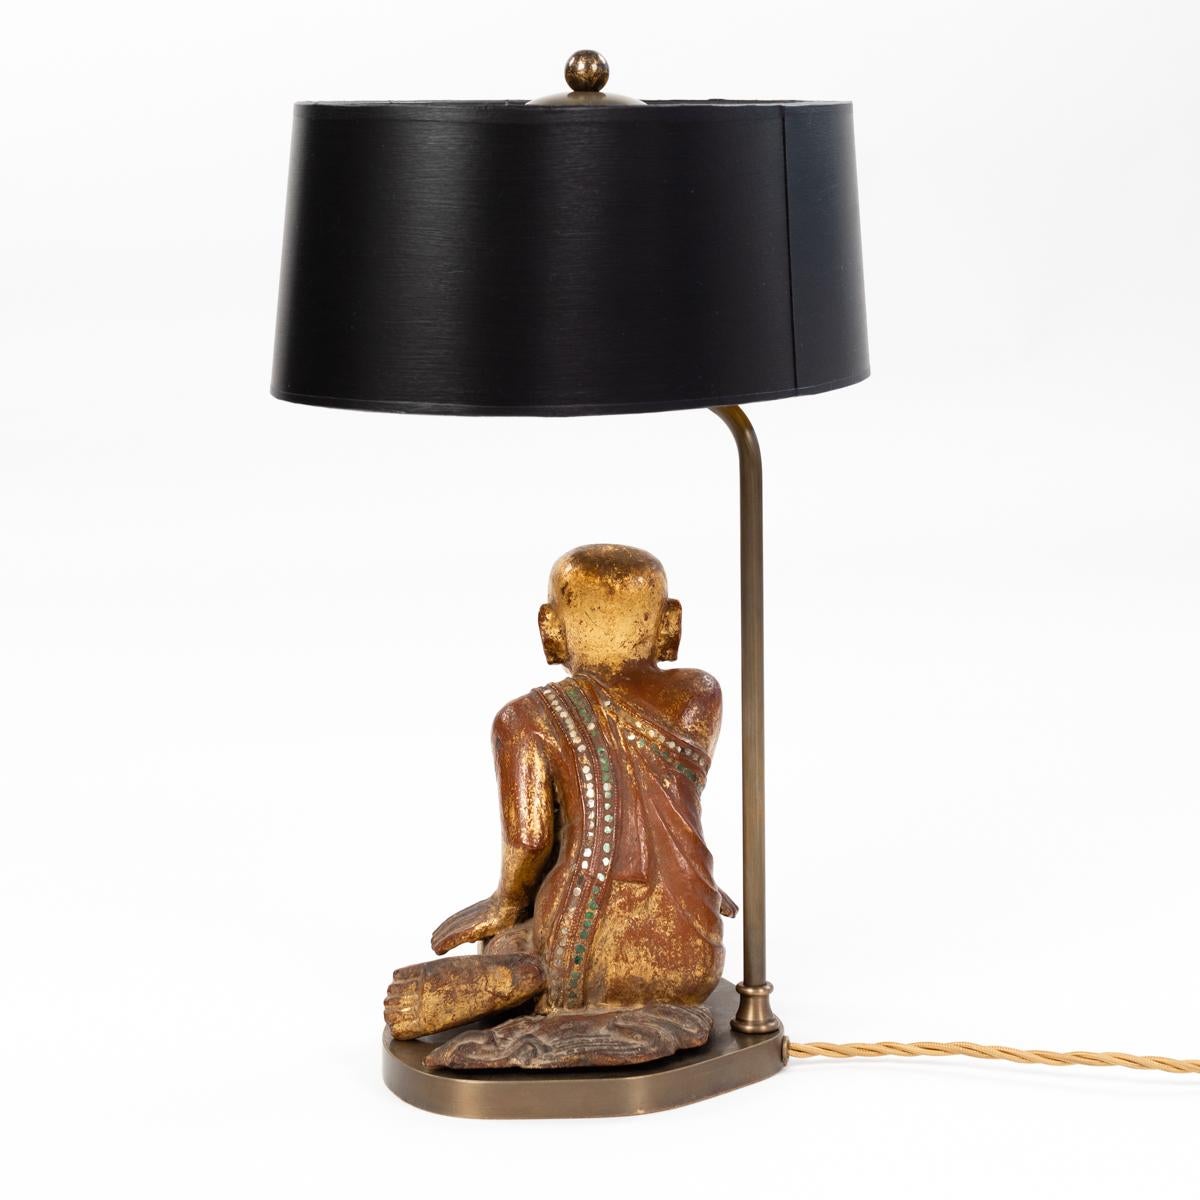 Burmese Table Lamp Sitting Wooden Mandalay Priest with Decorations, Burma, 19th Century